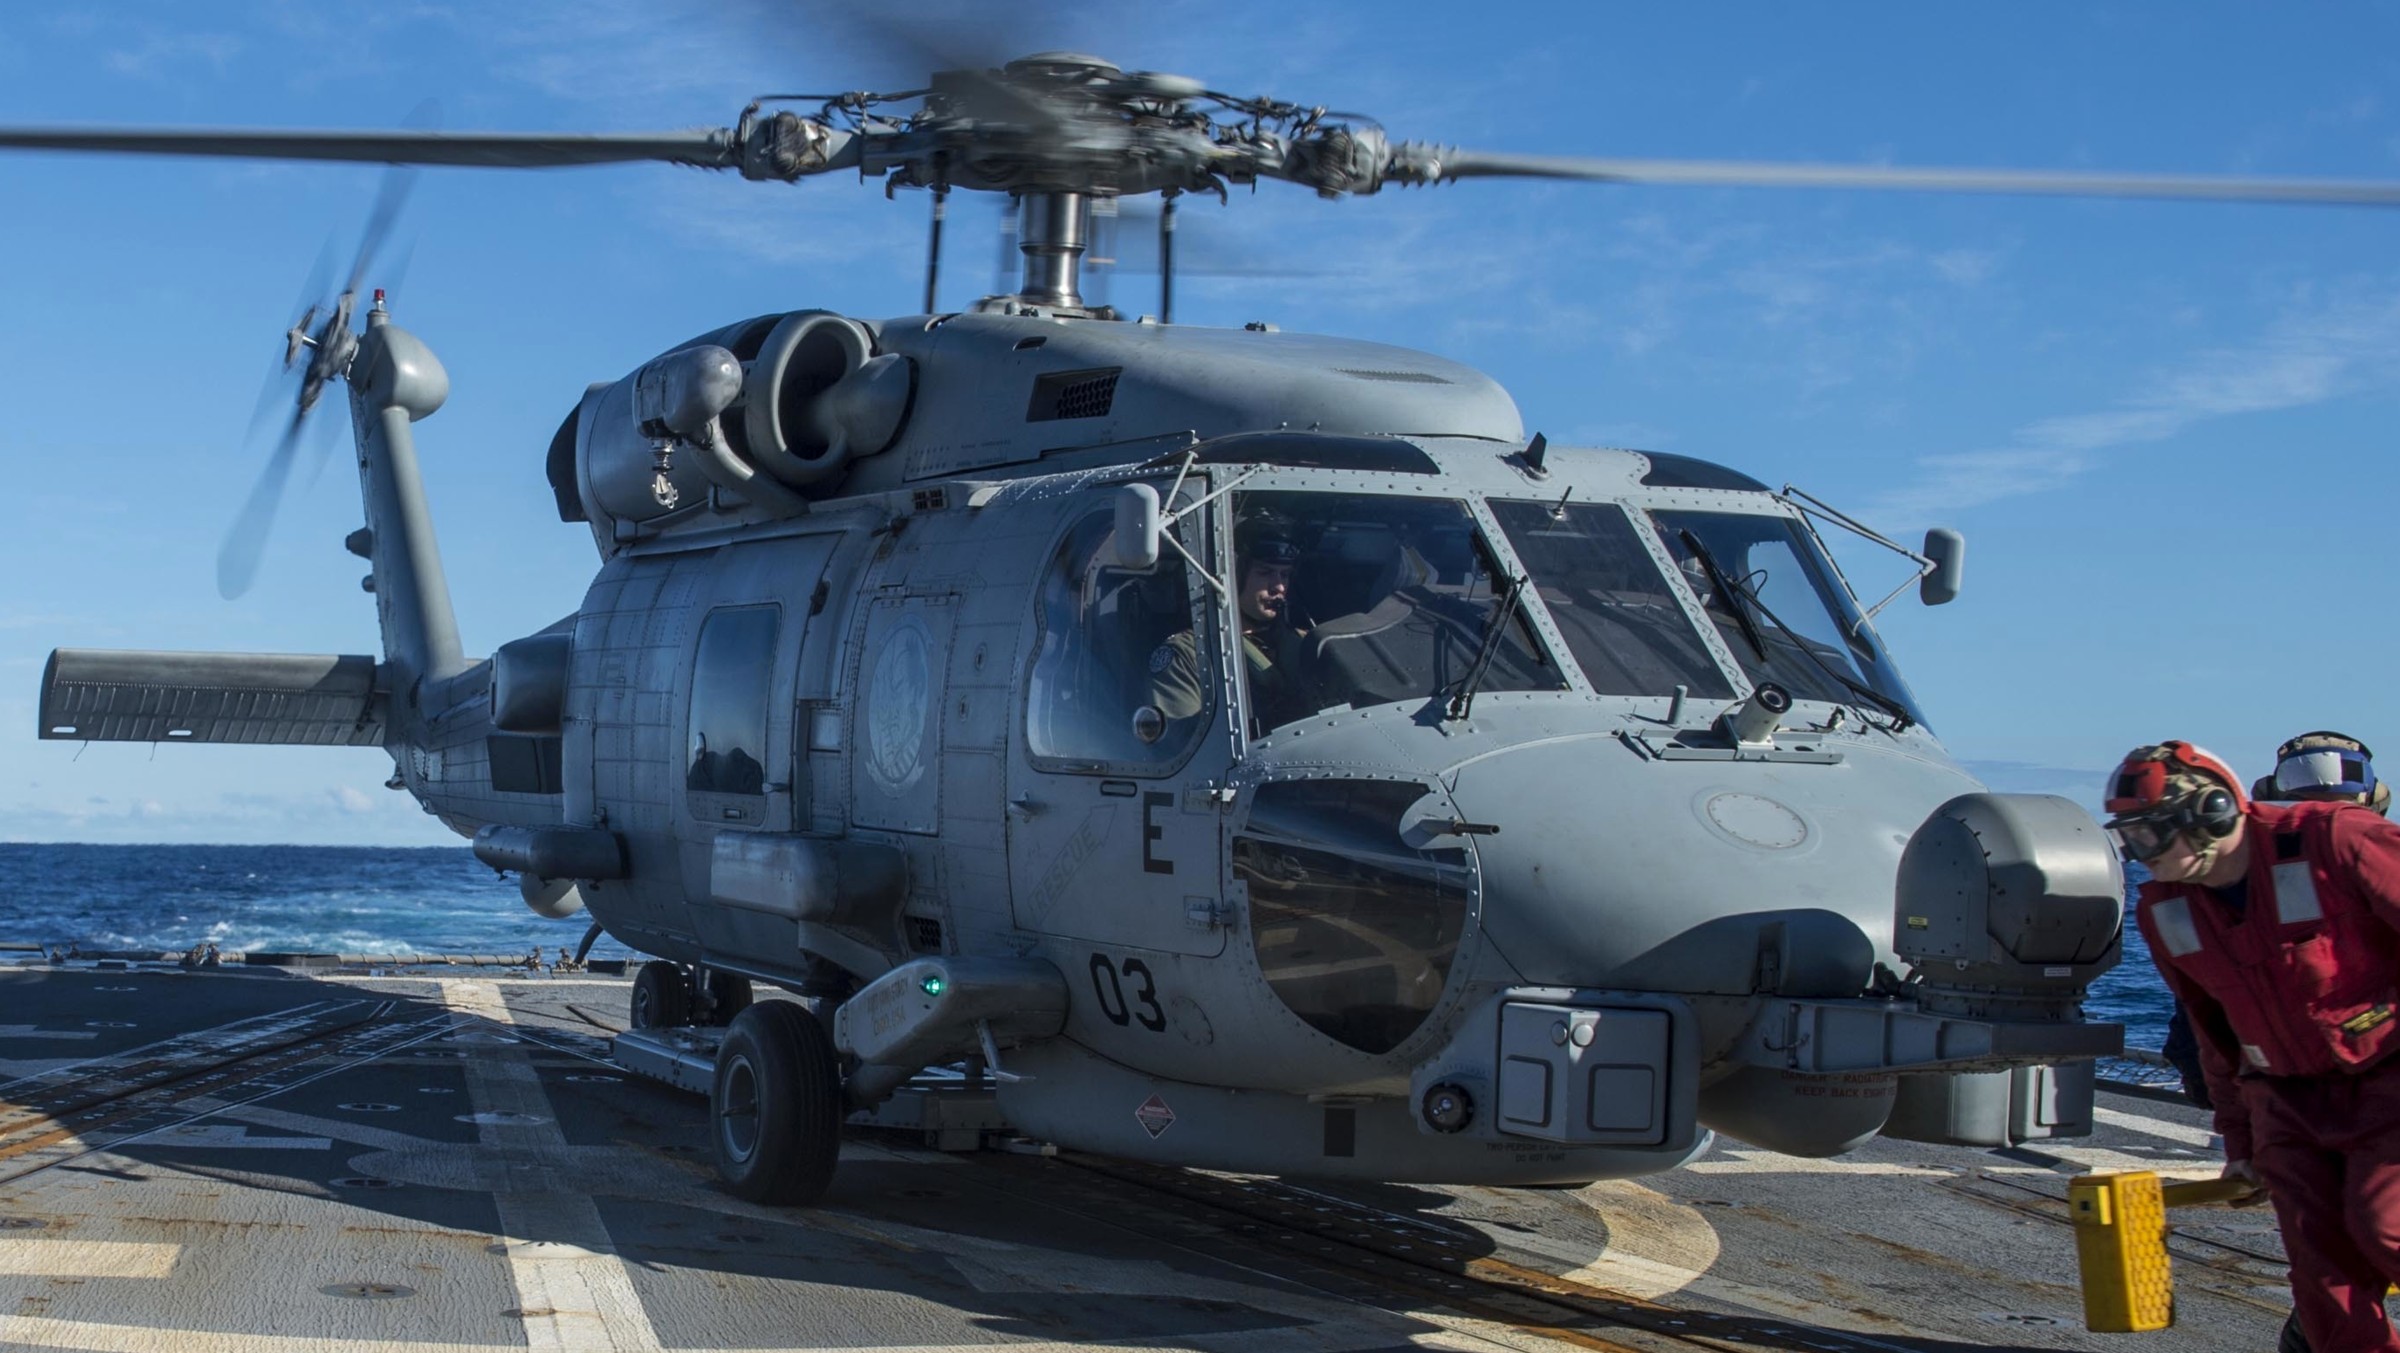 hsm-51 warlords helicopter maritime strike squadron mh-60r seahawk navy 2015 56